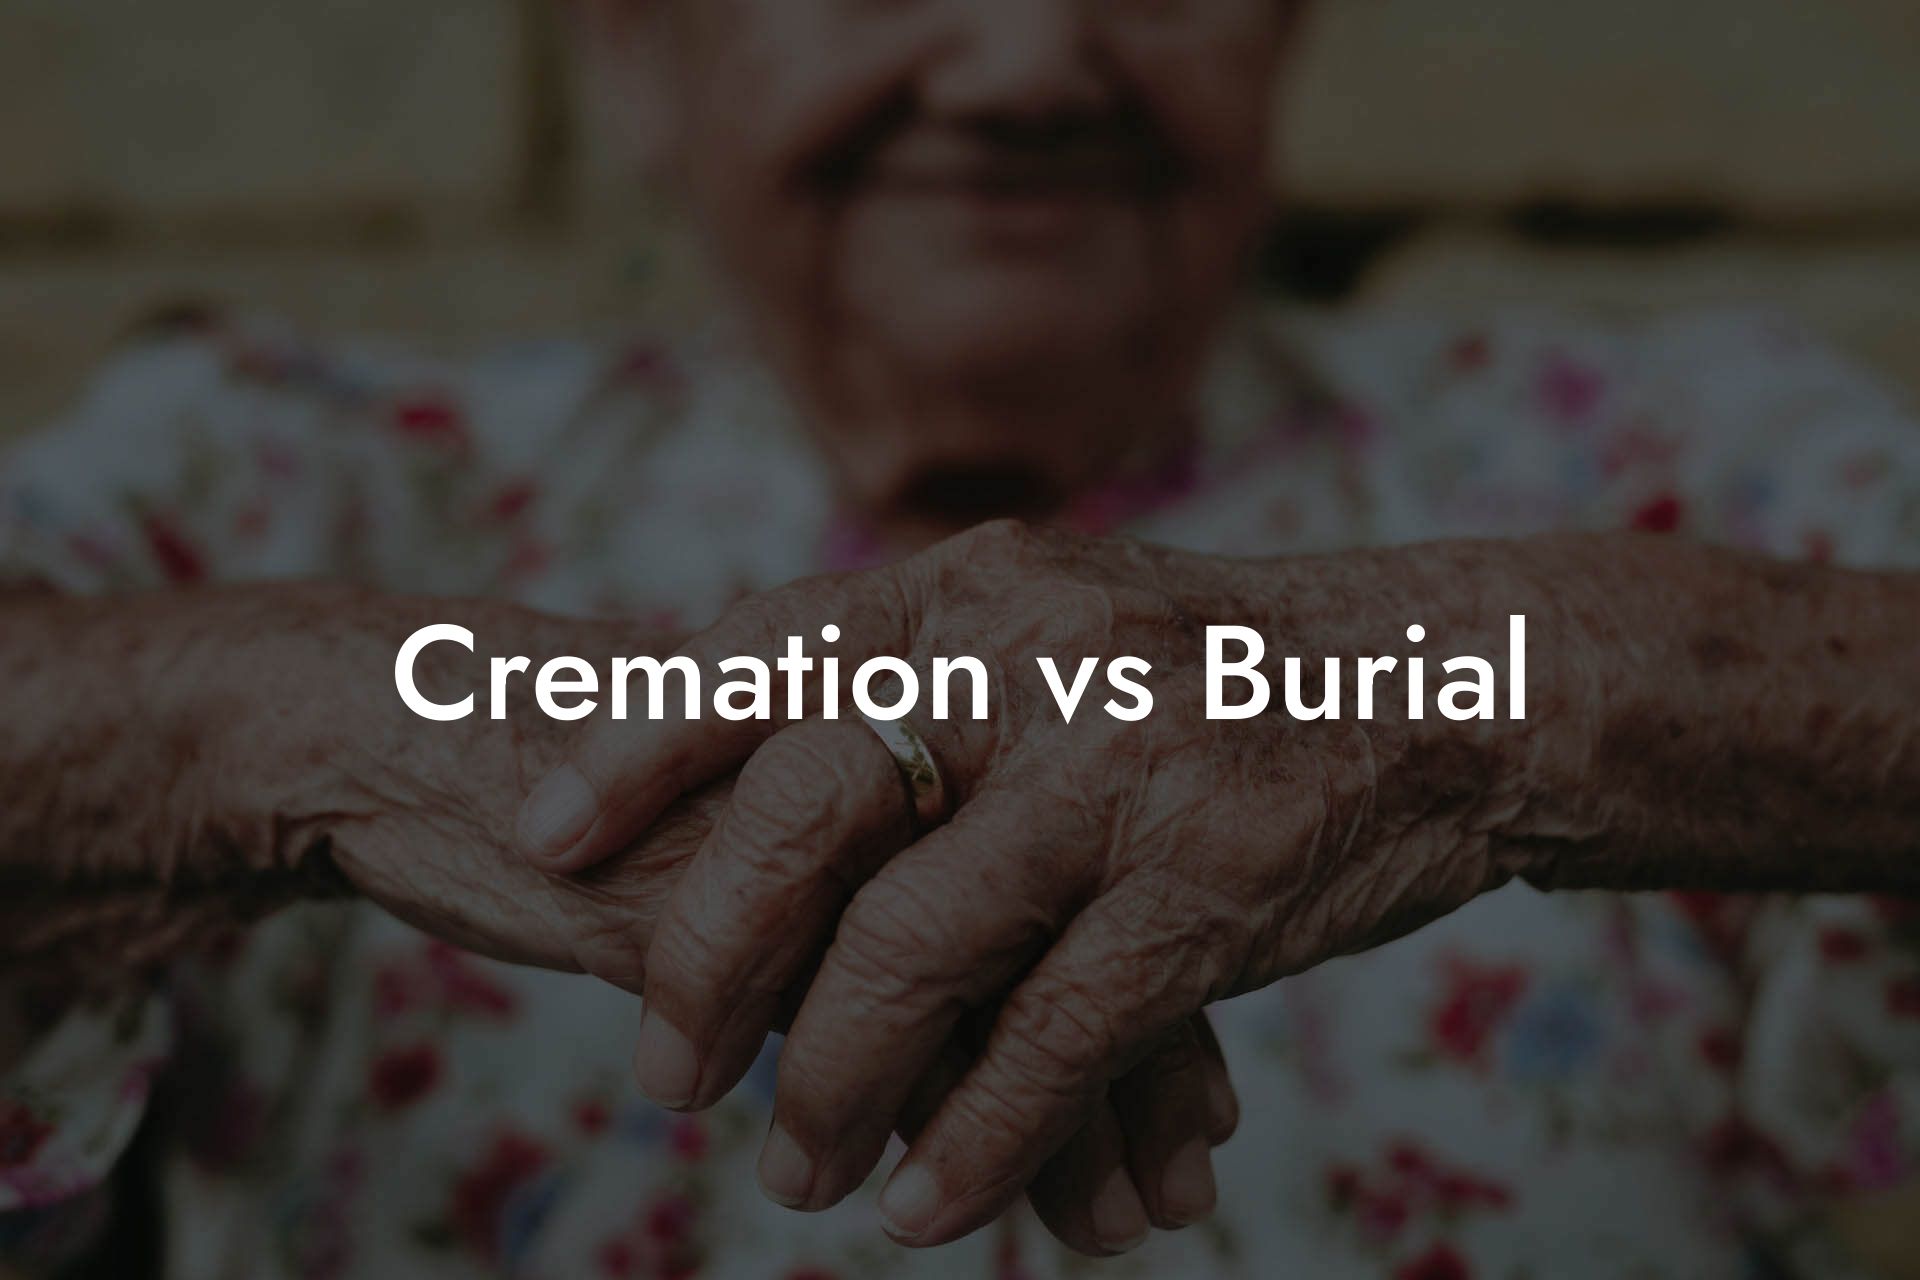 Cremation vs Burial